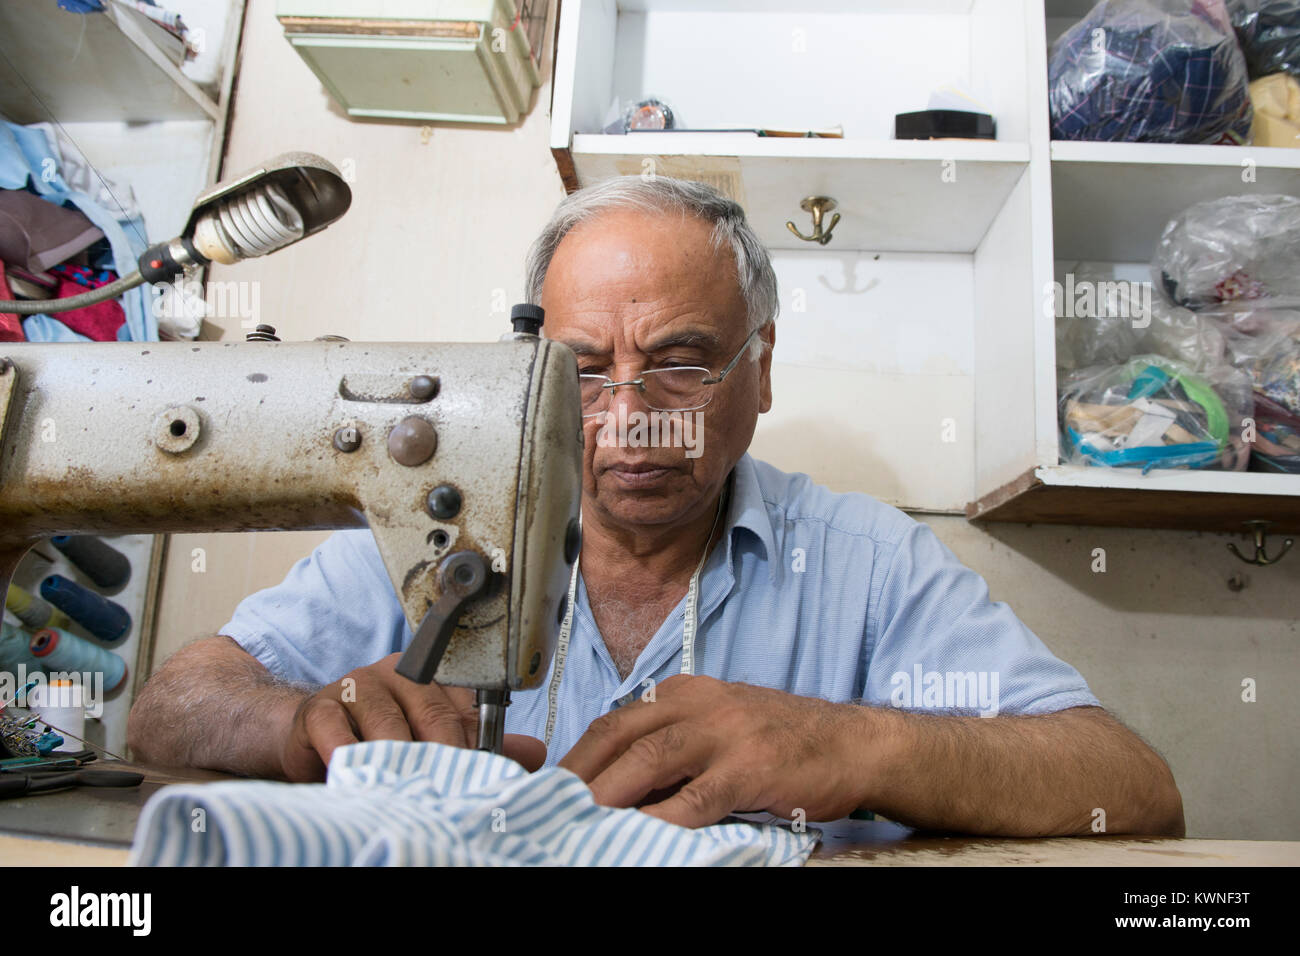 Tailor working with a sewing machine Stock Photo